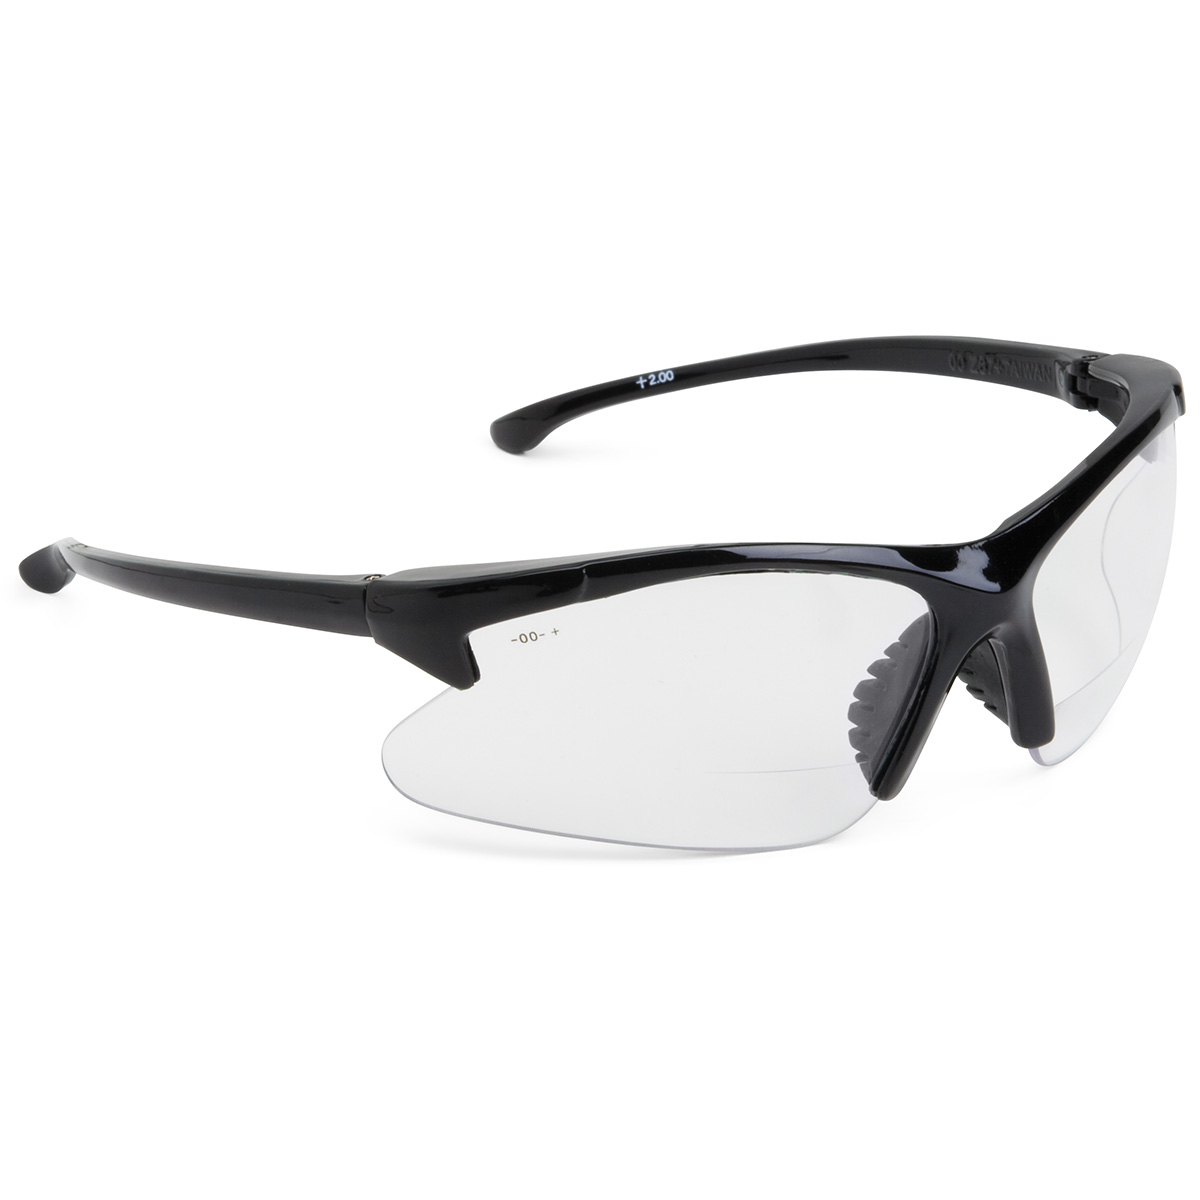 Bifocal Safety Glasses - Kimball Midwest